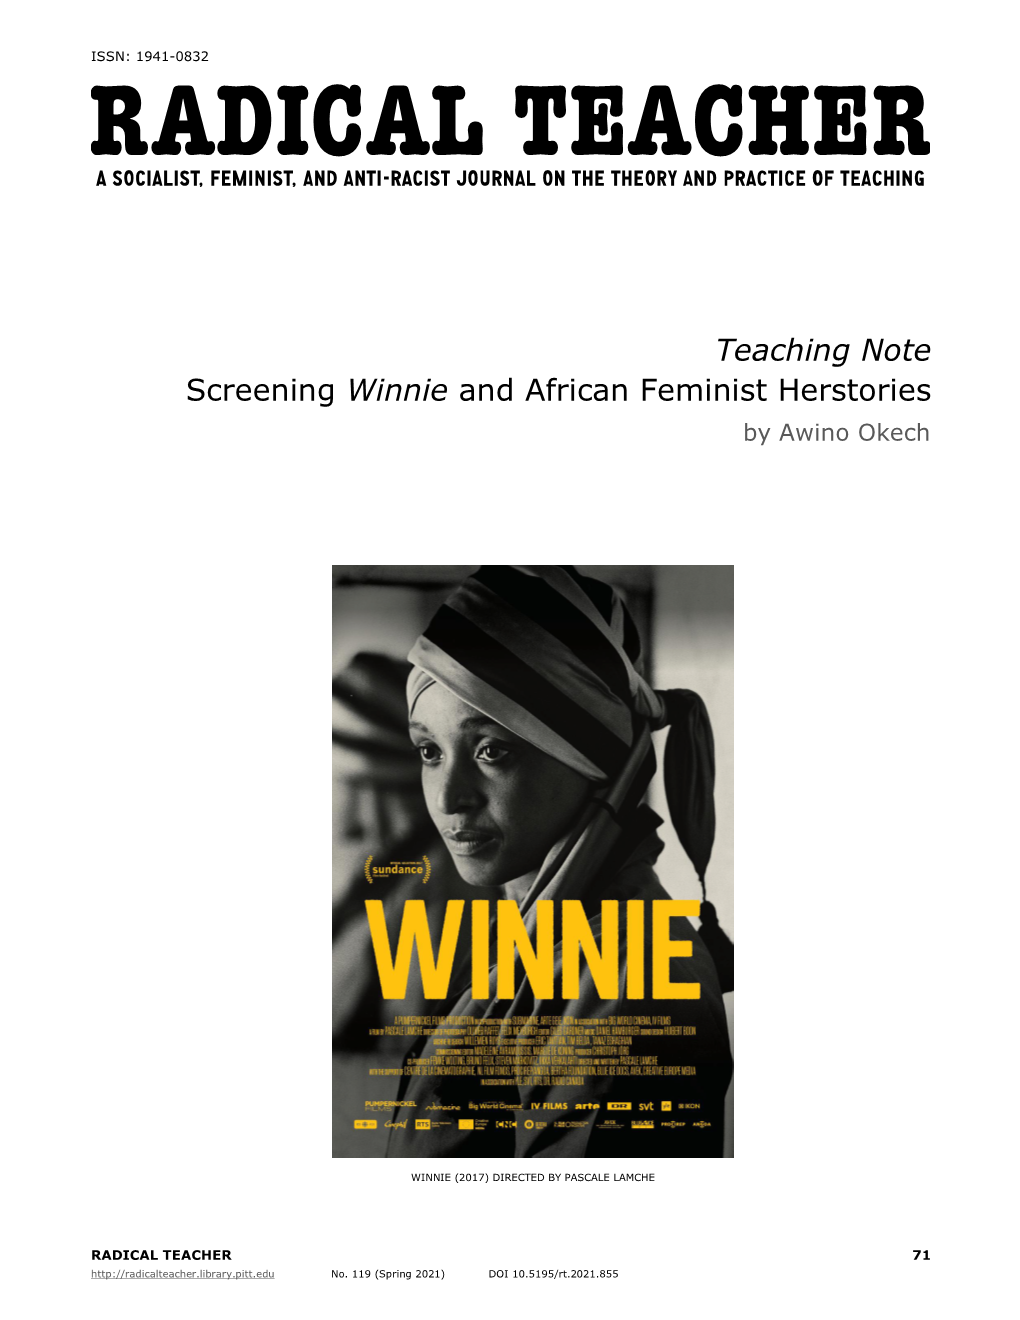 Teaching Note Screening Winnie and African Feminist Herstories by Awino Okech